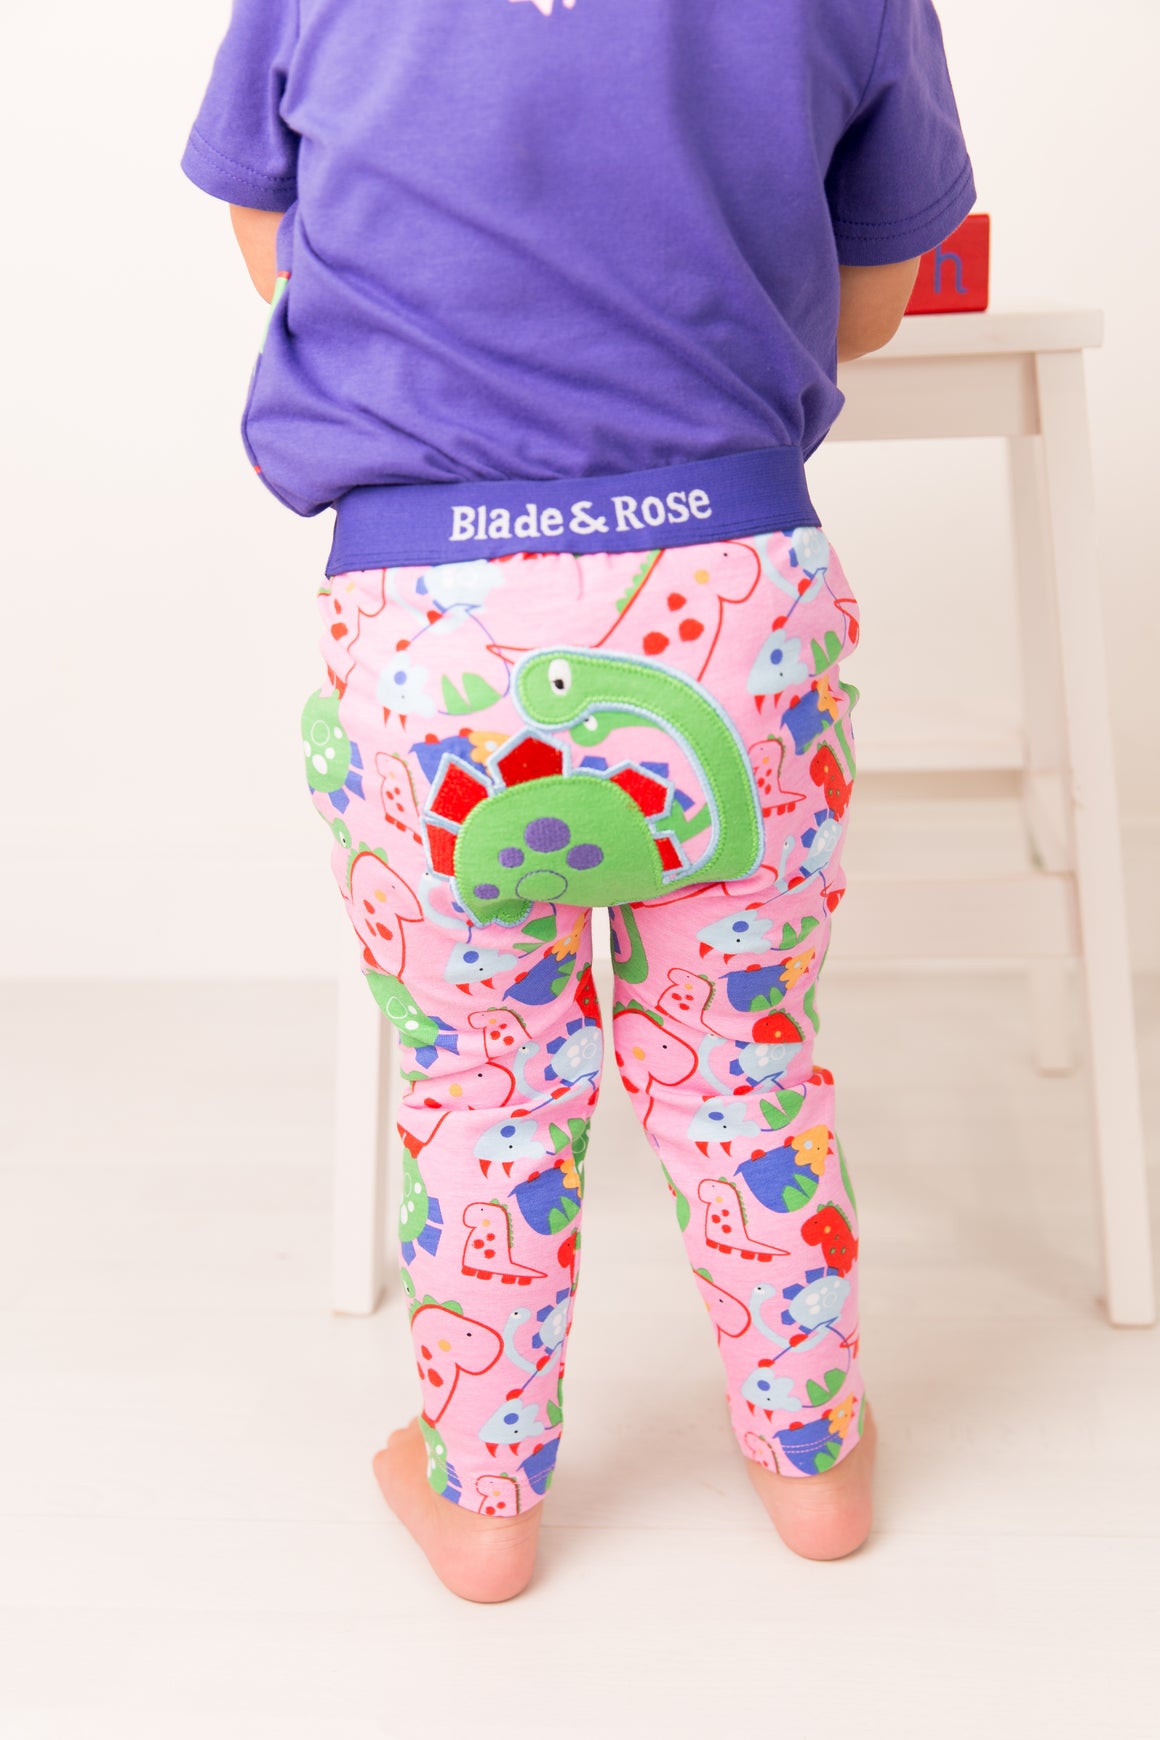 Blade and Rose Bright Dino Summer Leggings which are Beautiful and bright pink with a funky dino design.